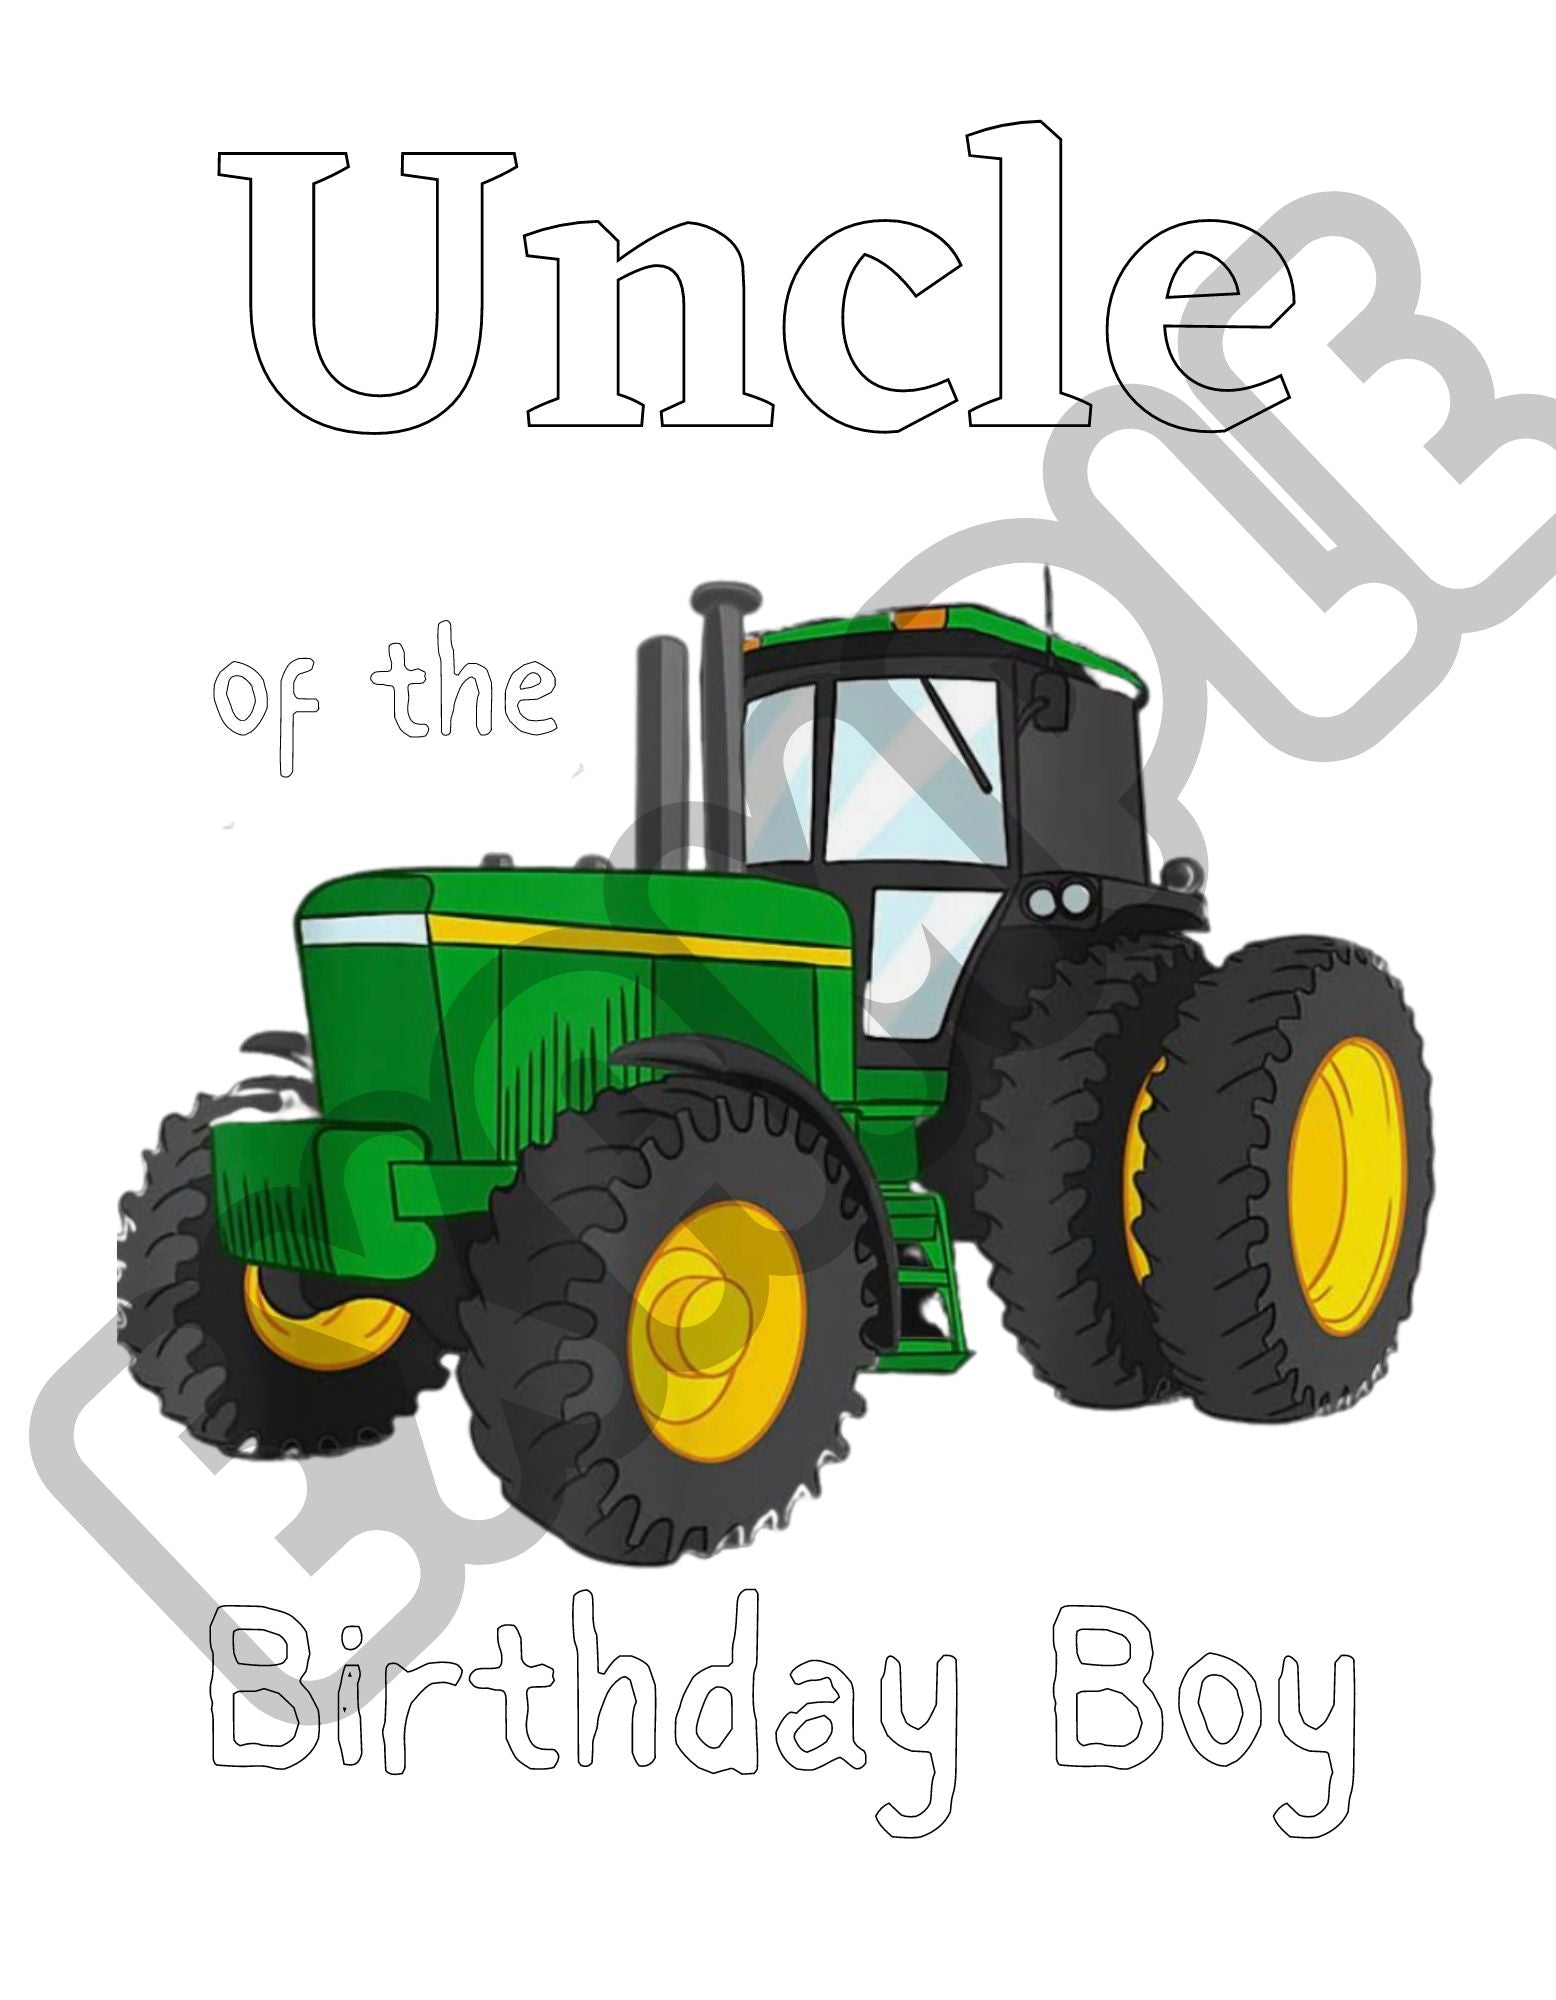 Green Tractor Family of The Birthday Boy Printable Transfer for Diy